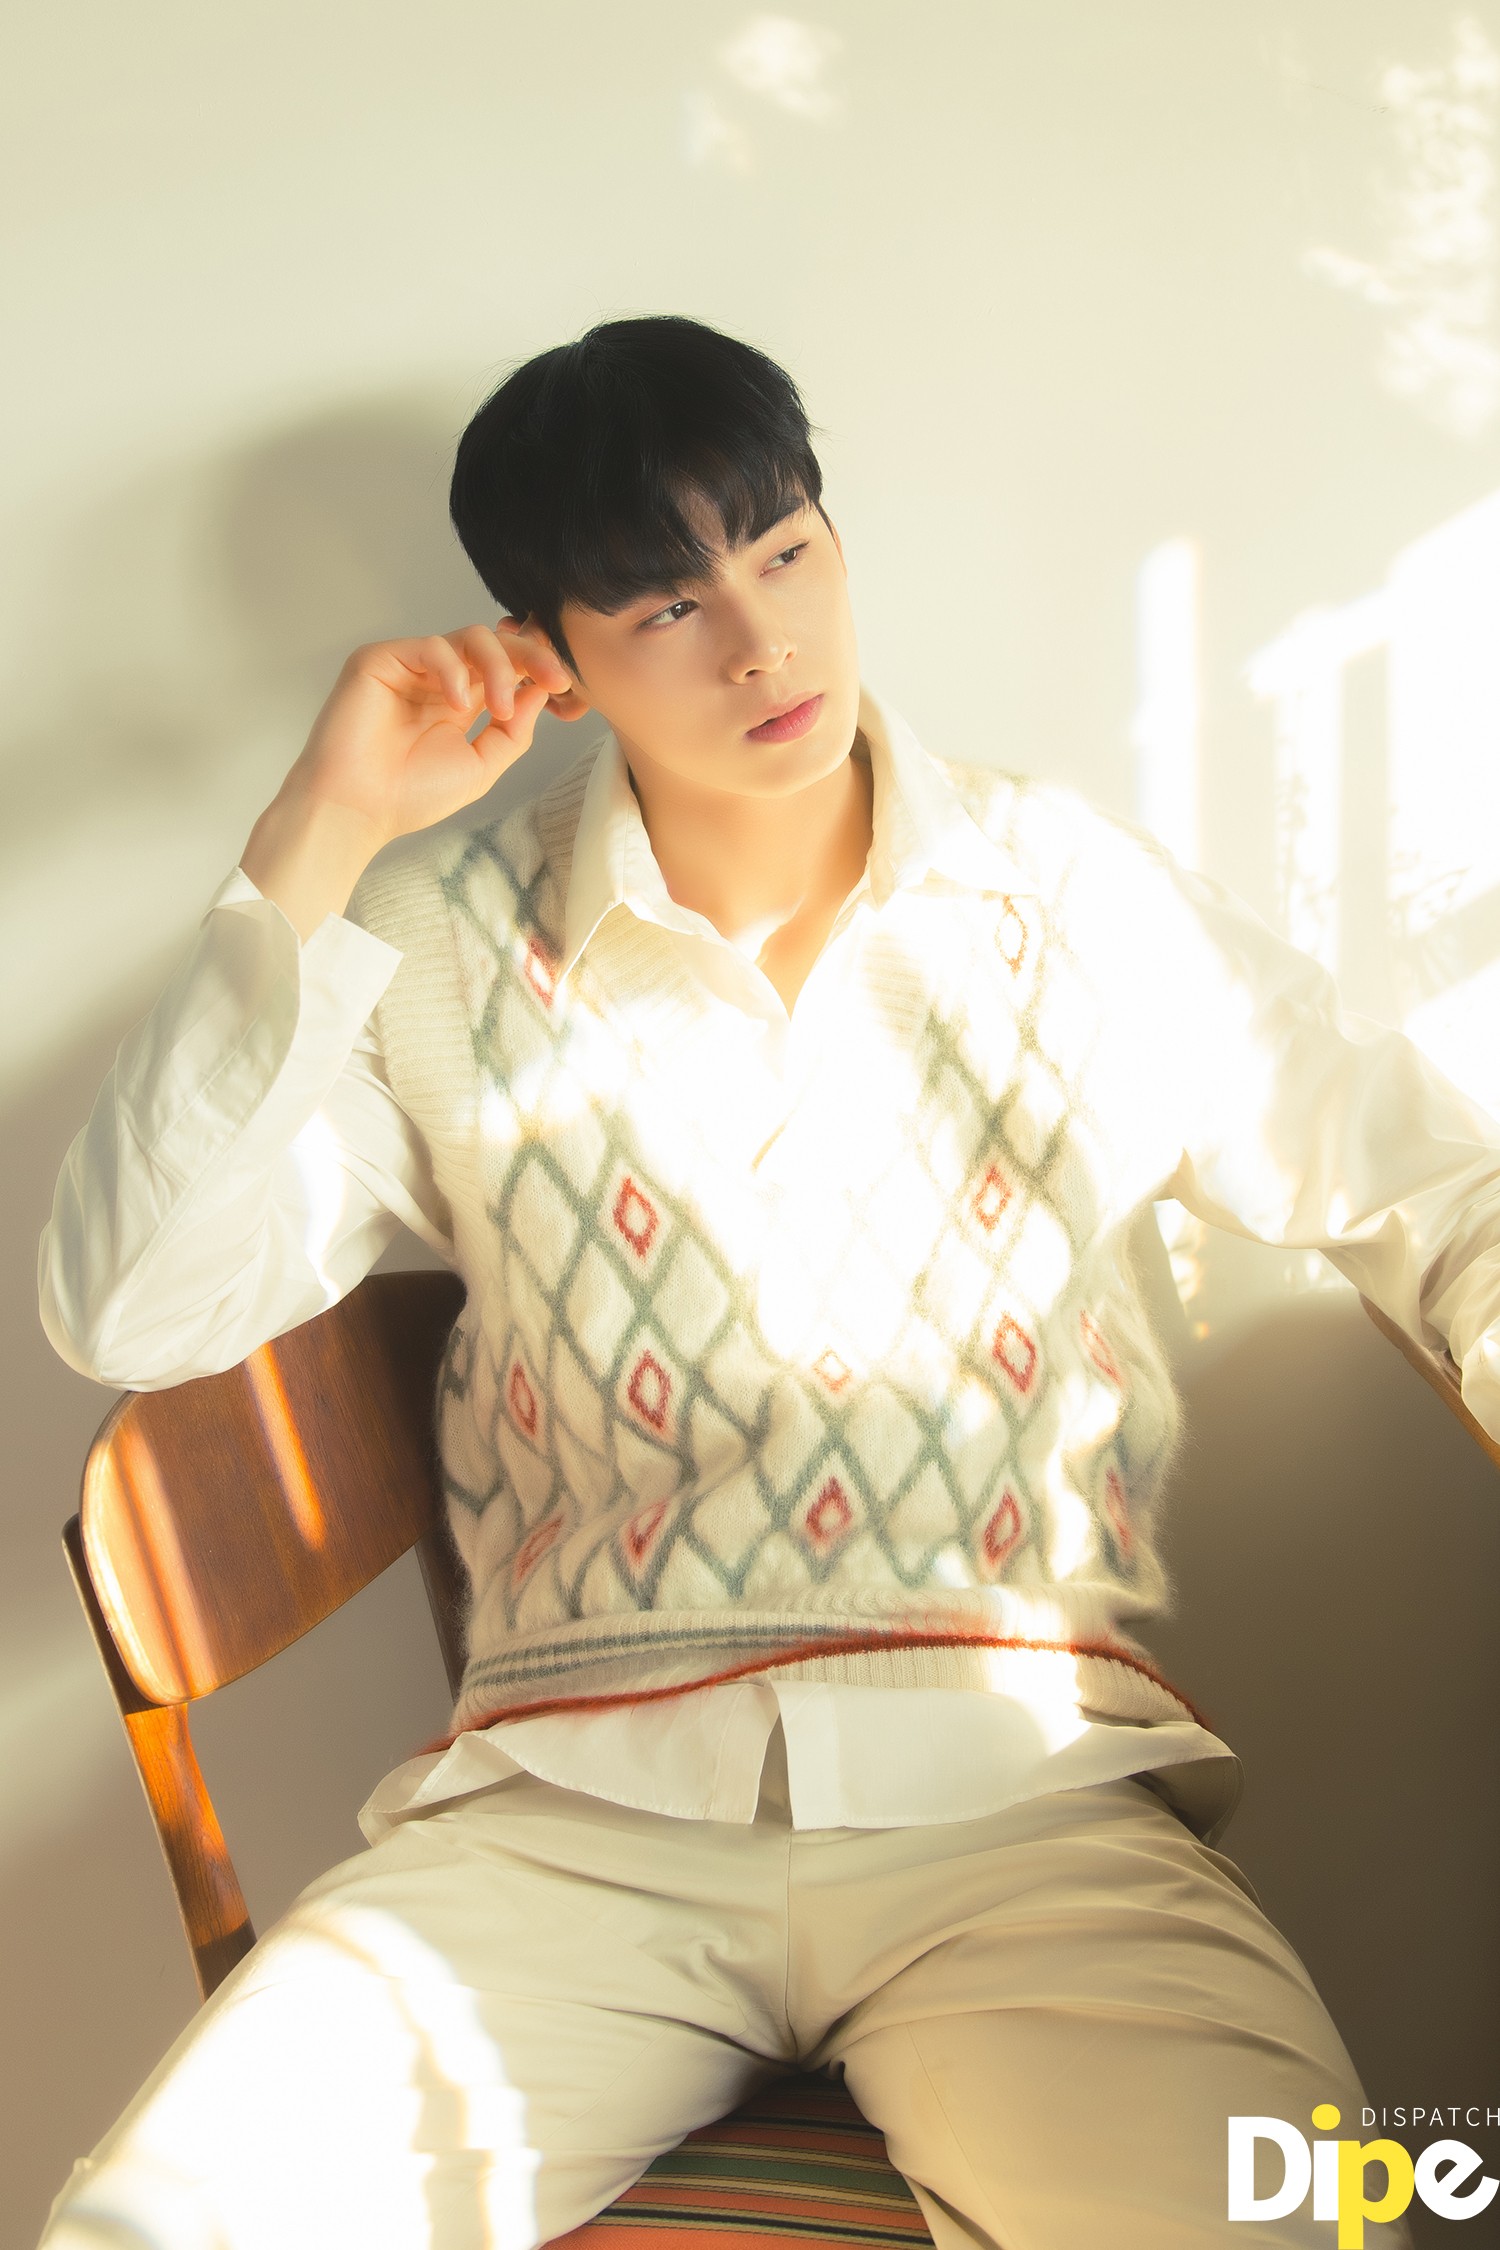 Hⓓ] Cha Eun Woo, and the Characteristics of Strikingly Handsome